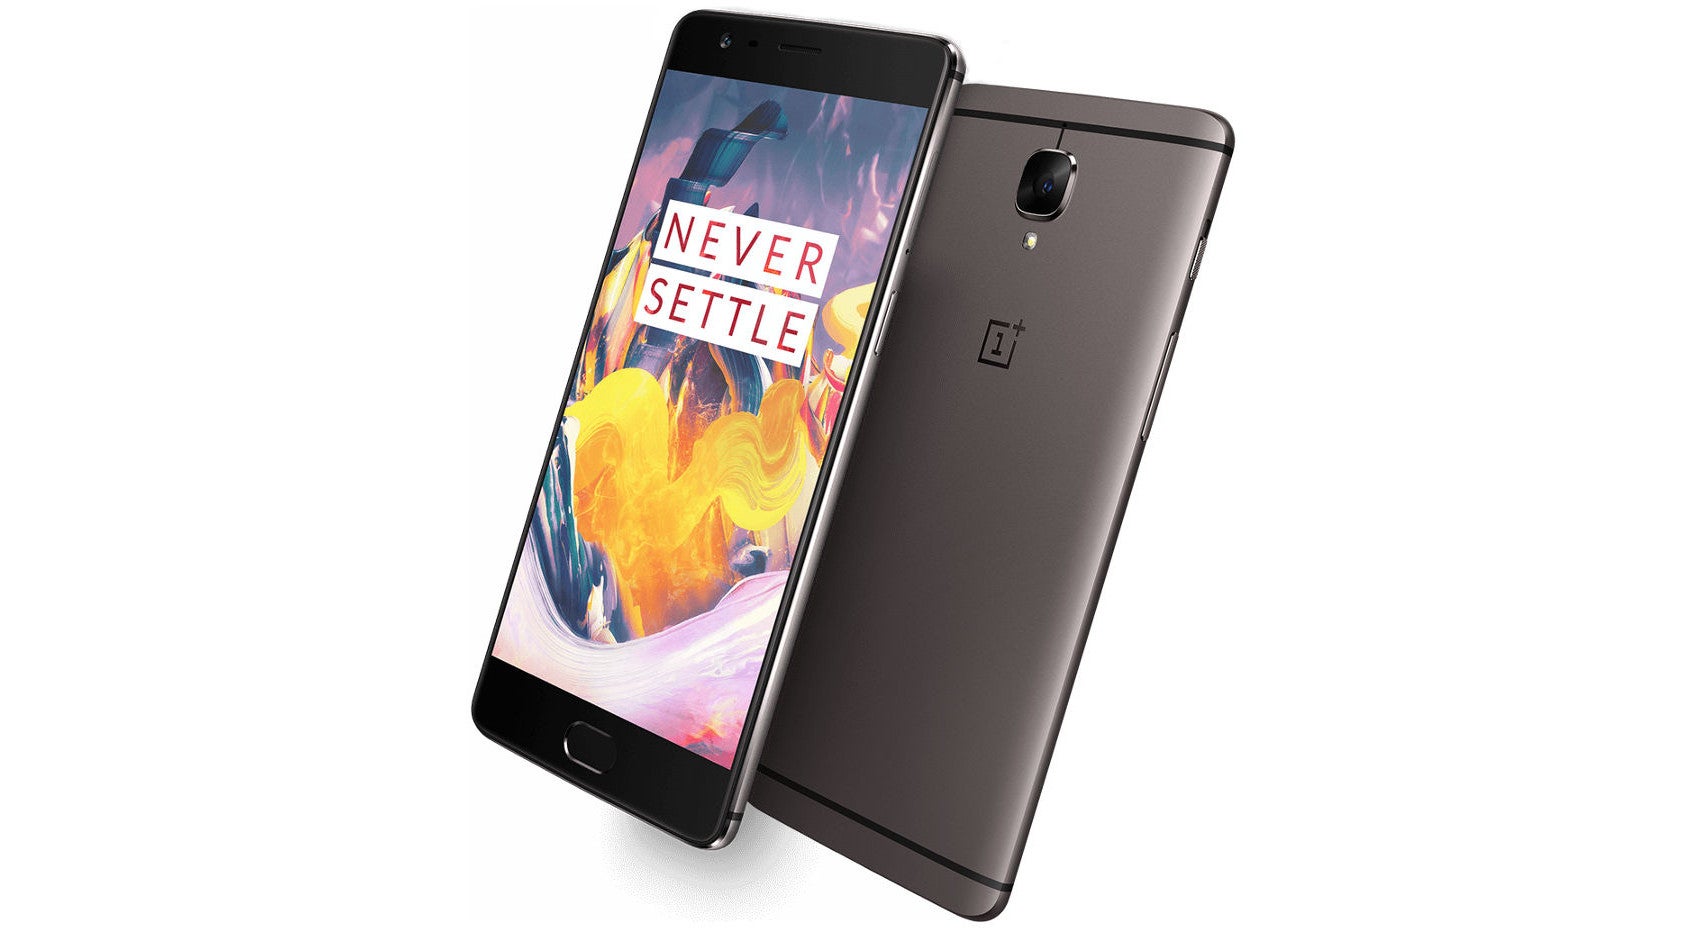 OxygenOS 4.1.0 featuring Android 7.1.1 for OnePlus 3 and 3T starts rolling out